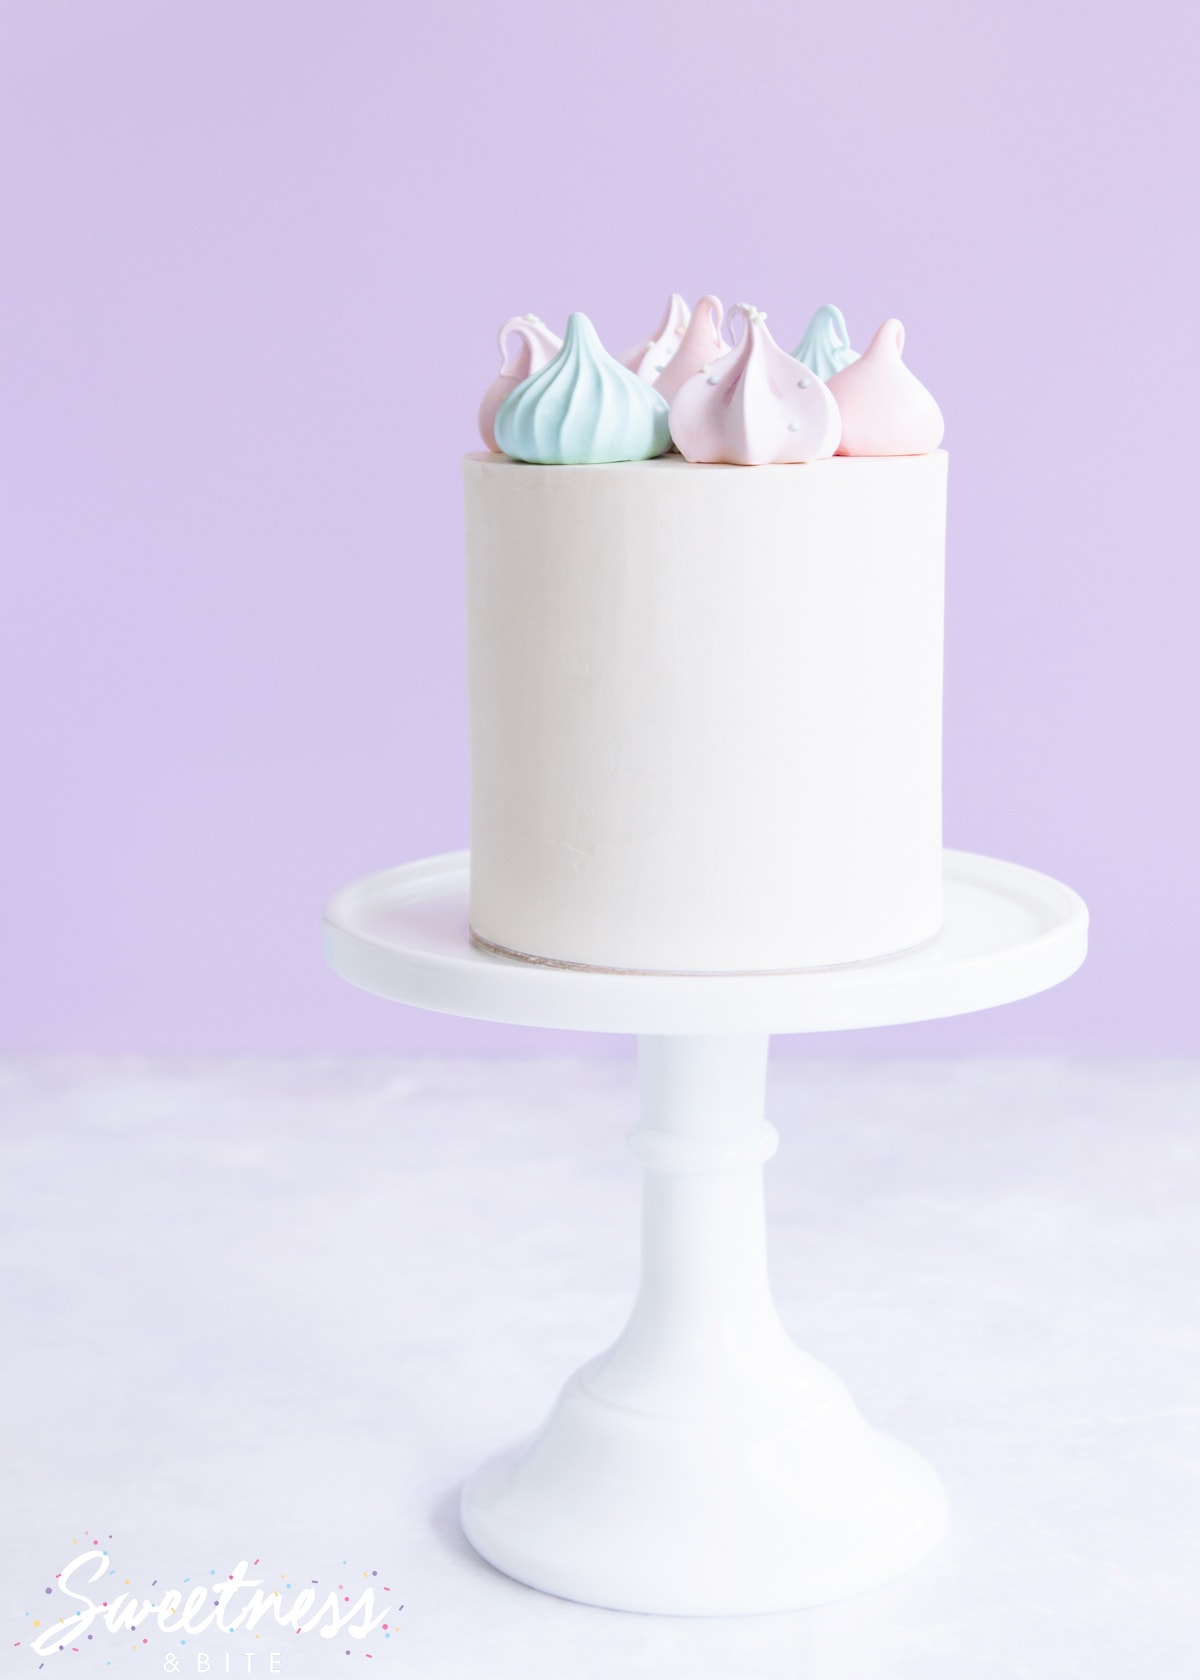 A cake covered in whitened white chocolate ganache on a white cake stand decorated with pastel meringues.